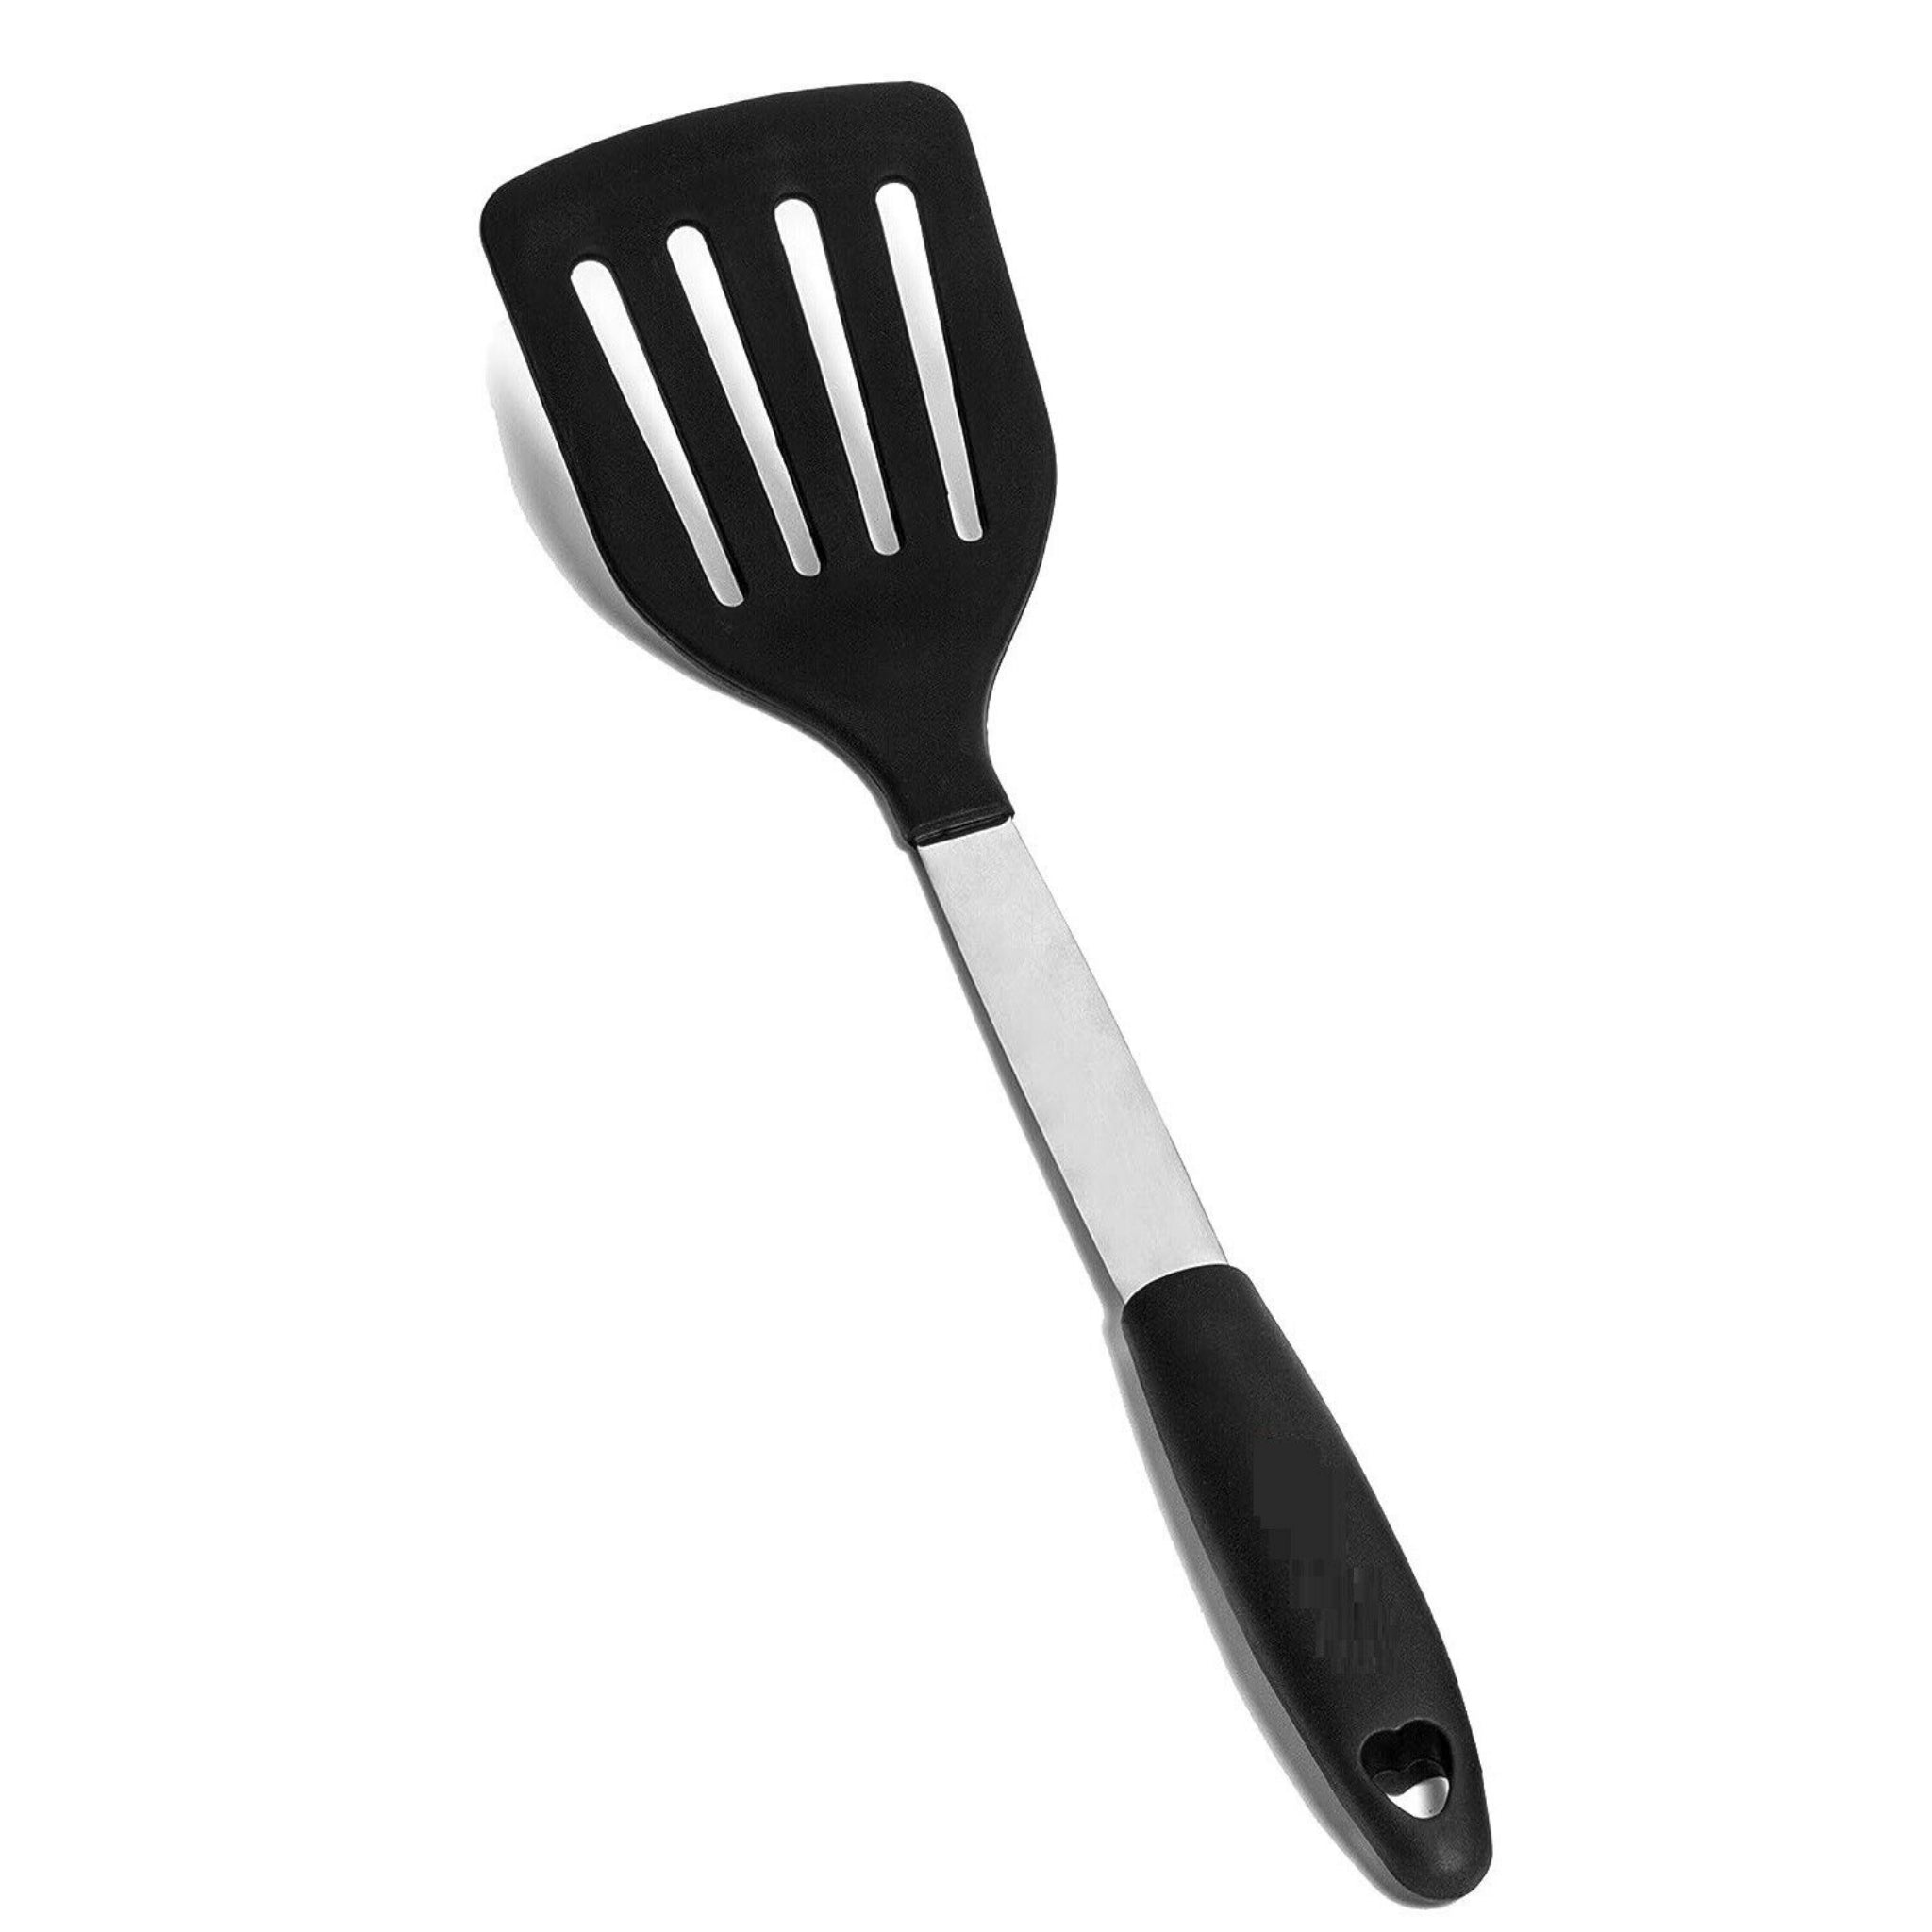 Beclen Harp 32cm Nylon Non Stick Solid And Slotted Turner/Flipper Heat  Resistant Spatula-Perfect Kitchen/Cooking Companion Tool, Slotted Turner  Spatula Heat Resistant Flipper Cooking Tool Nylon Material Premium Quality  Steel Core Ergonomic Handle